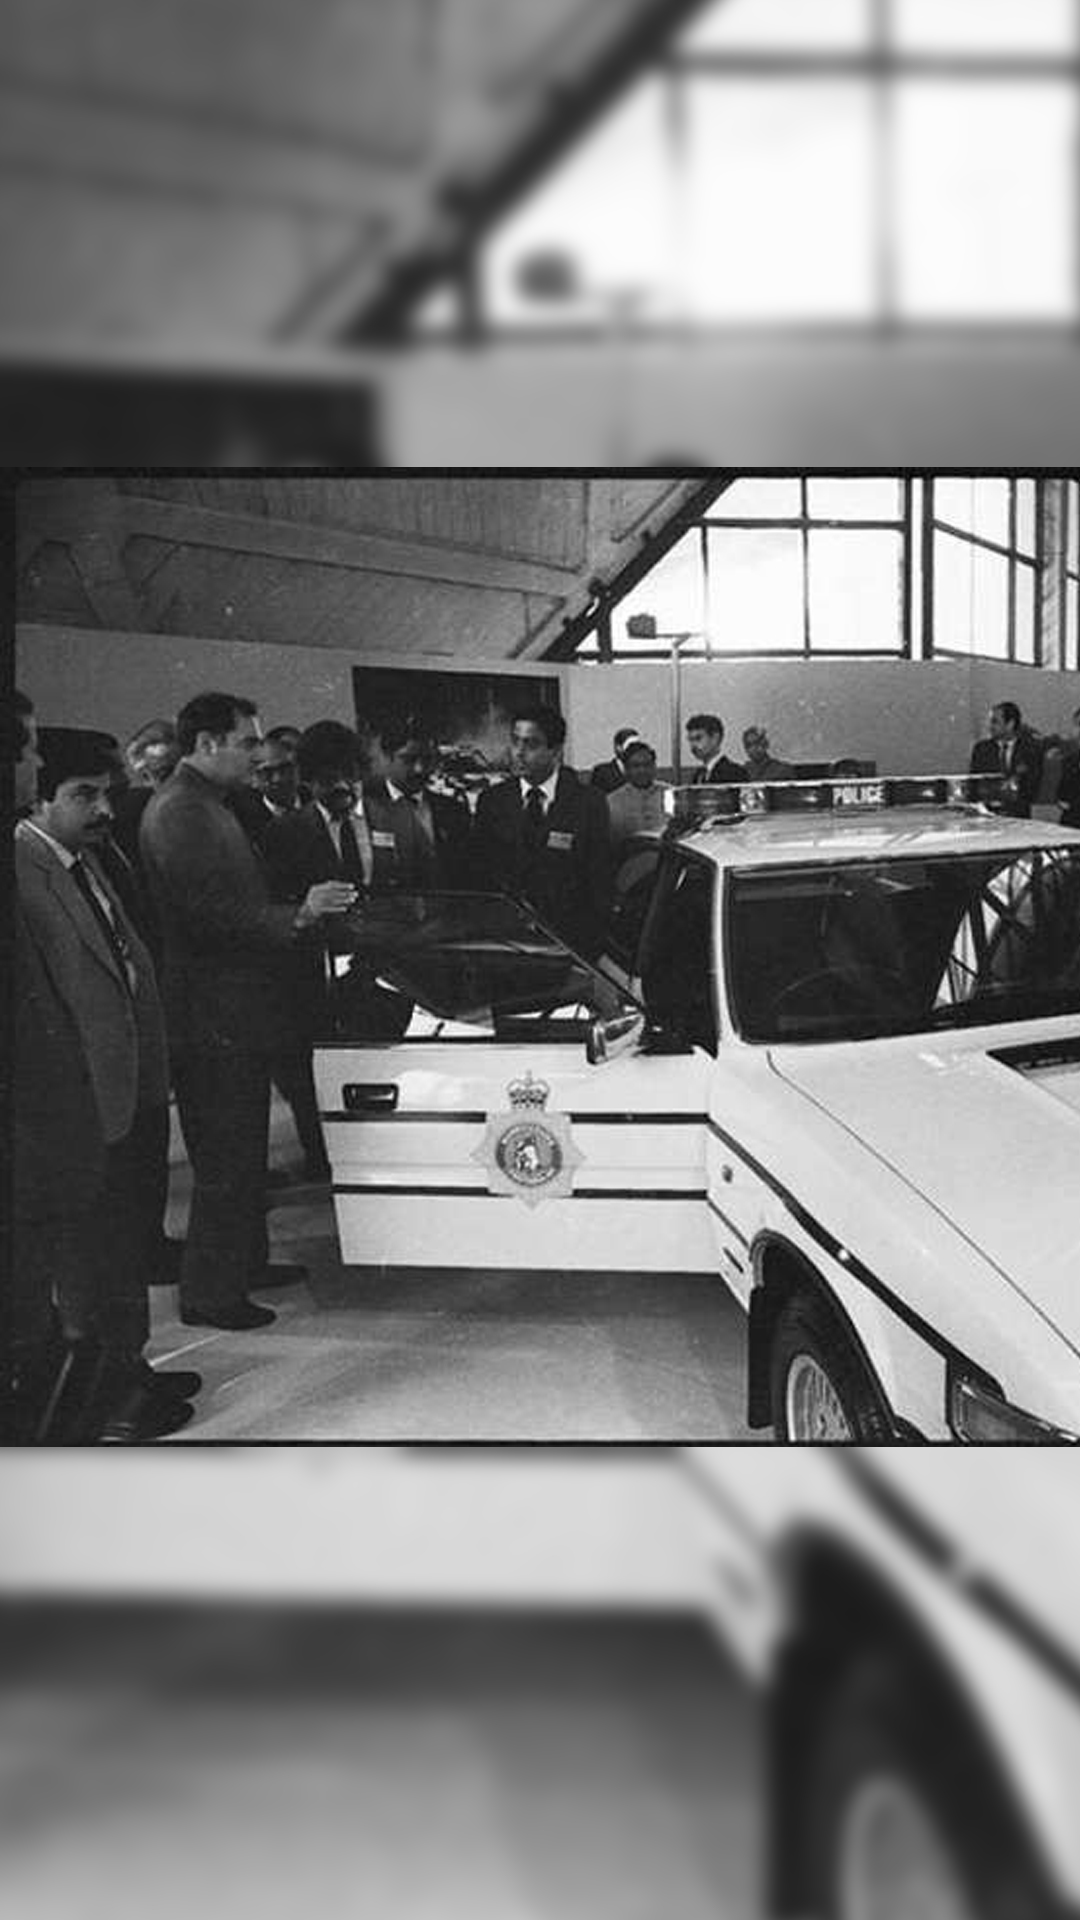 It was 1986 when Auto Expo started in India 